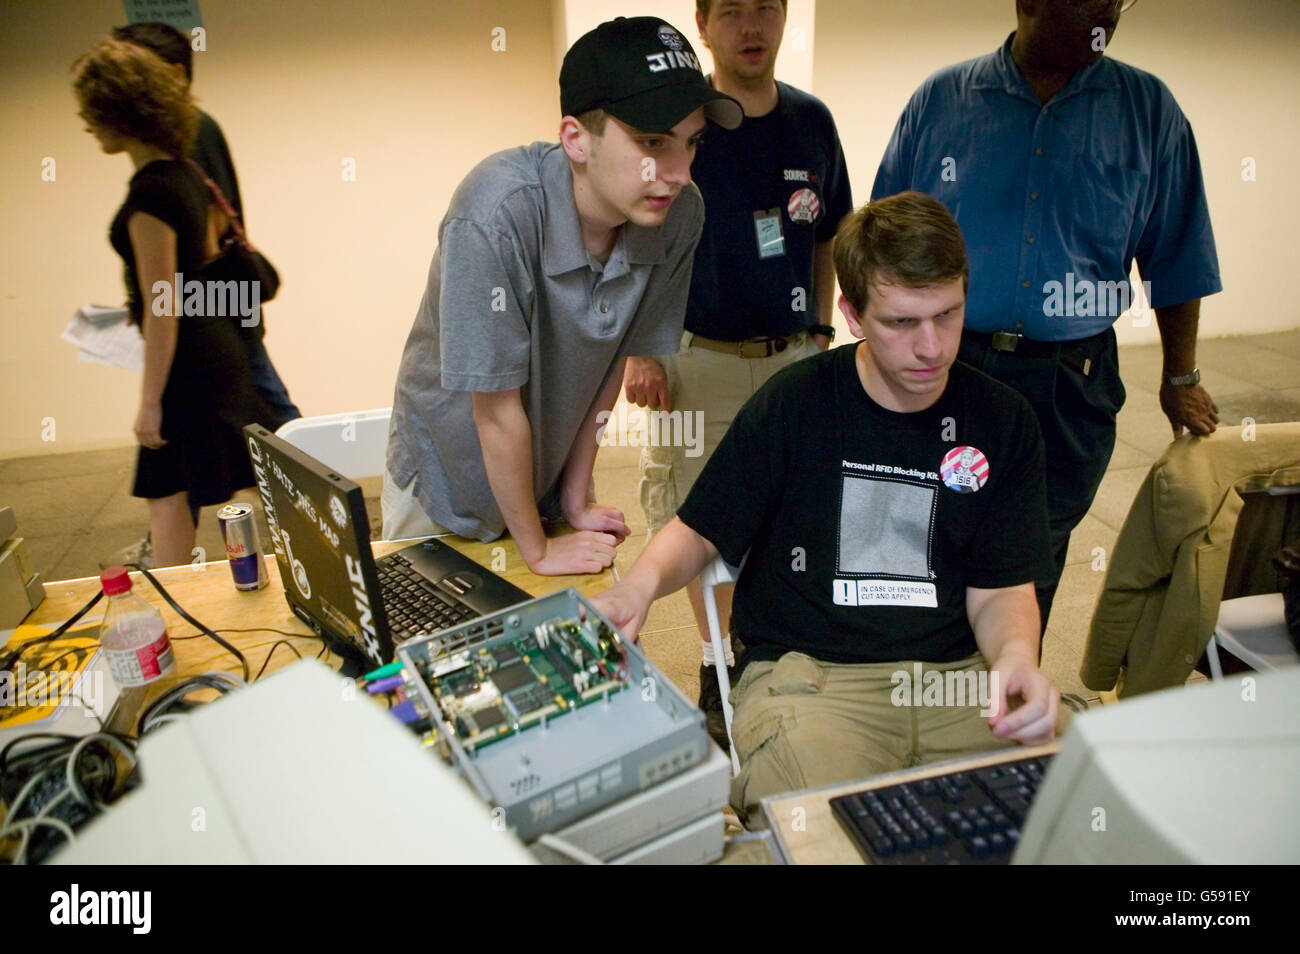 Organizers of the 6th edition of HOPE, an annual hackers' convention, work on setting up a network, July 22nd 2006, New York Cit Stock Photo